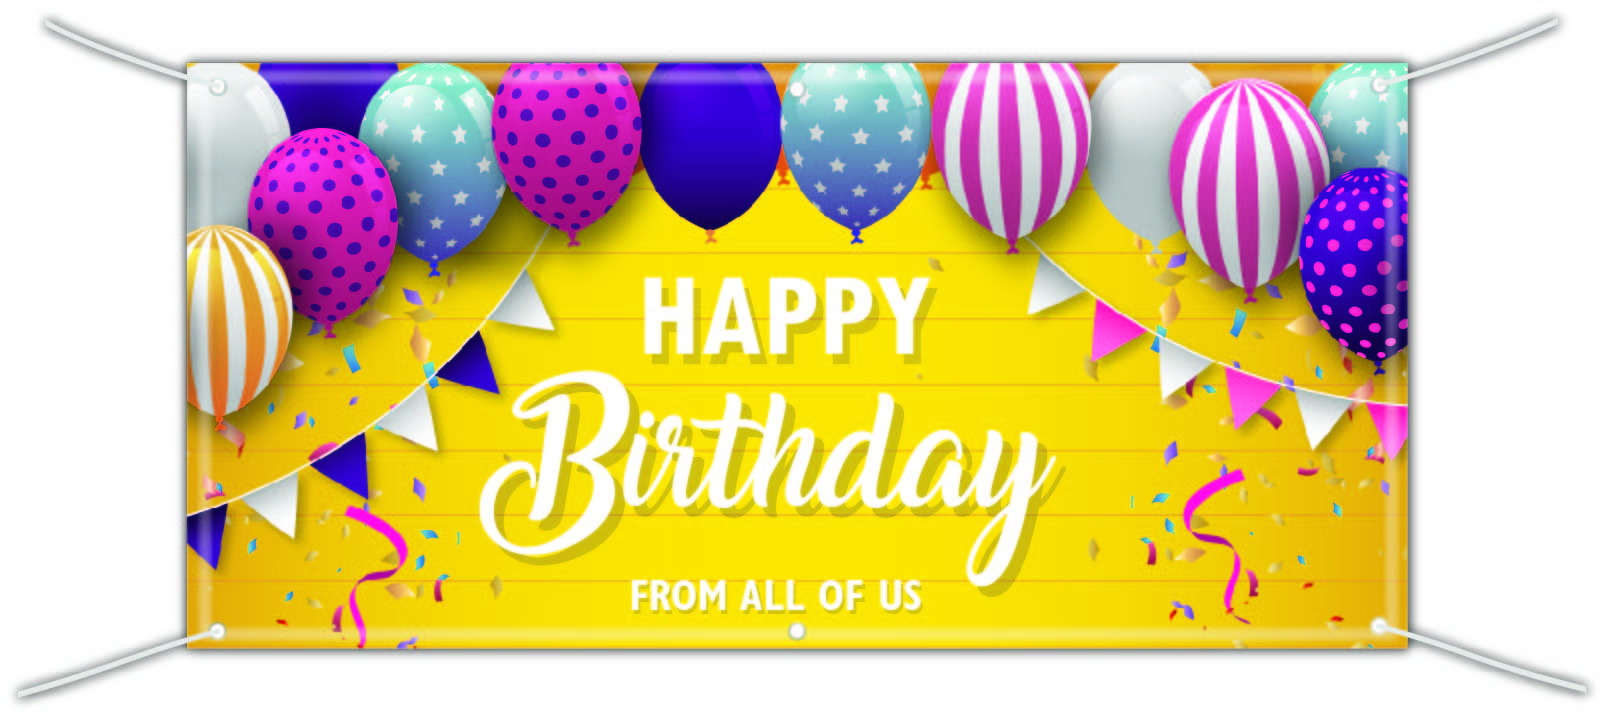 Personalized Happy Birthday Banners & Signs | POPbanner